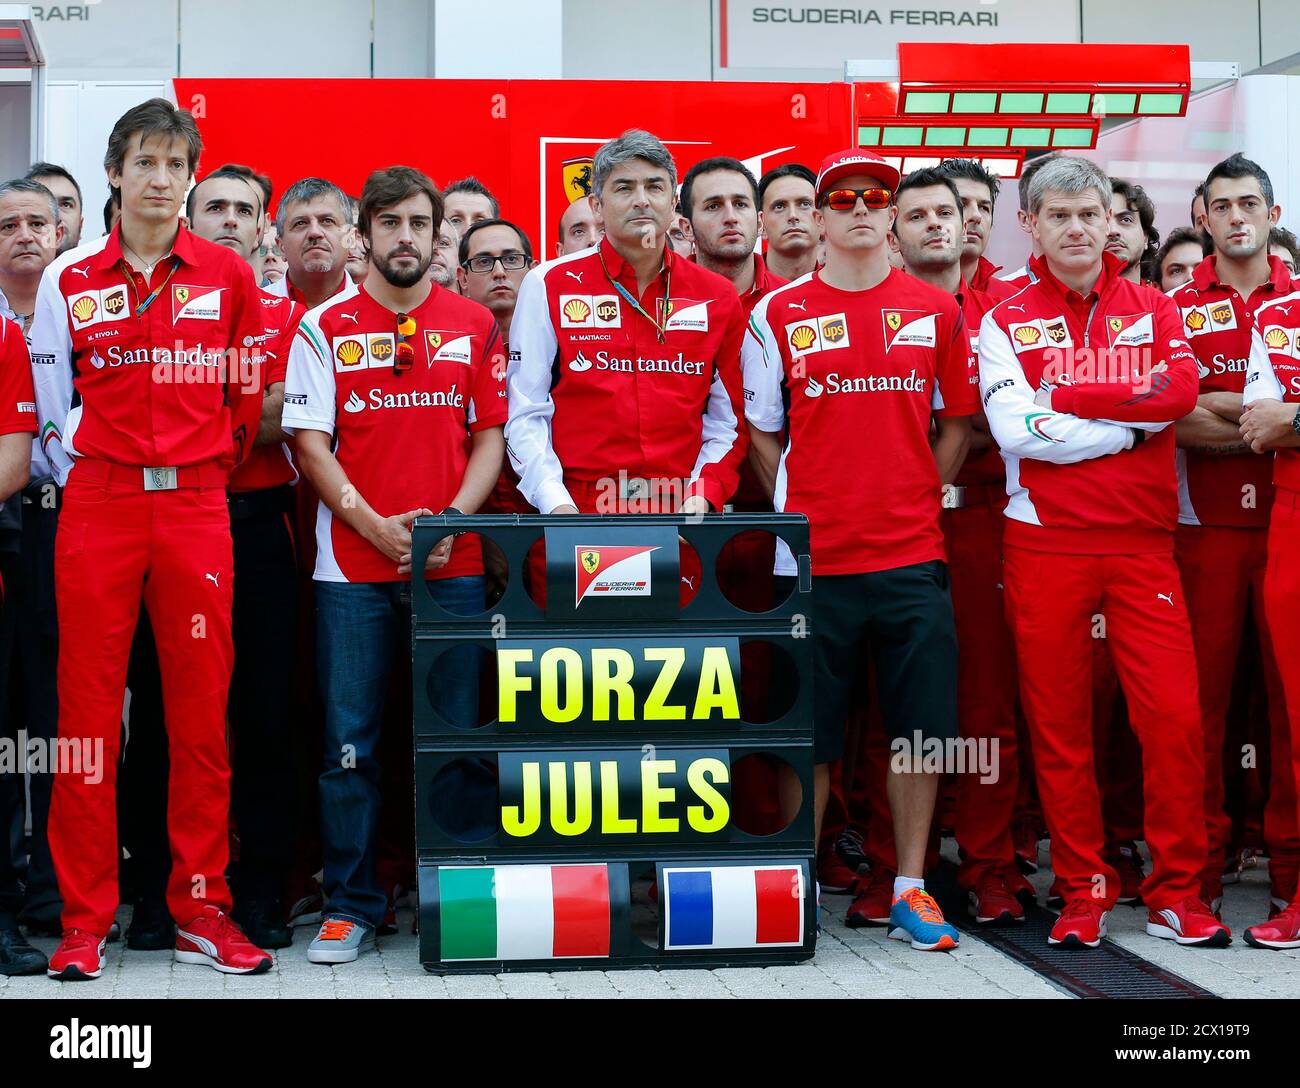 Members of Ferrari Formula One team pose with a sign in support of Marussia Formula One driver Jules Bianchi of France before the first Russian Grand Prix in Sochi October 12, 2014. Formula One drivers have backed proposals to introduce a 'virtual safety car' or automatic speed limiter that would force the entire field to slow when yellow warning flags are waved. The idea was raised by race director Charlie Whiting at the Russian Grand Prix on Saturday as one of the measures being considered following Bianchi's horrific crash in Japan last weekend. REUTERS/Laszlo Balogh (RUSSIA - Tags: SPORT M Stock Photo